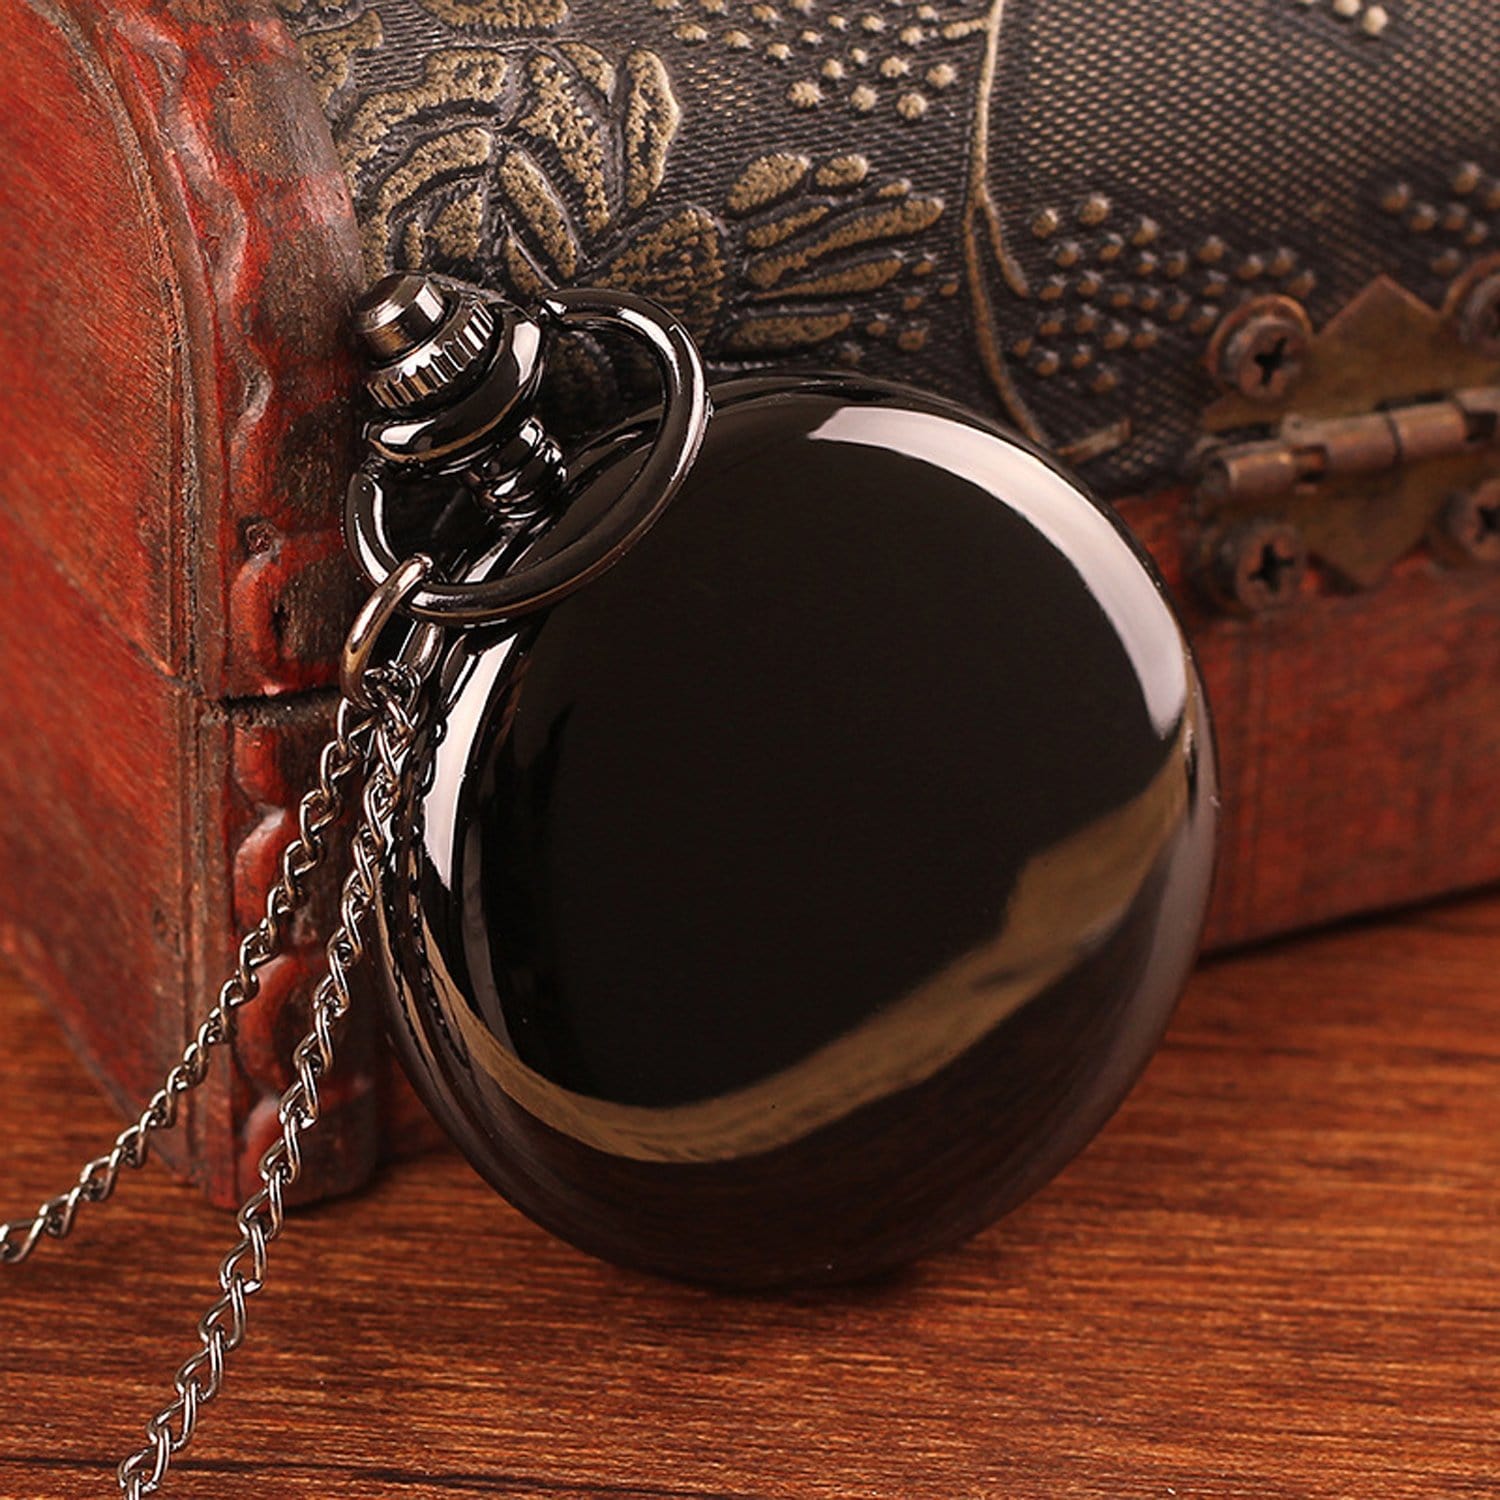 Pocket Watches To My Man - I Love You For All That You Are Pocket Watch GiveMe-Gifts